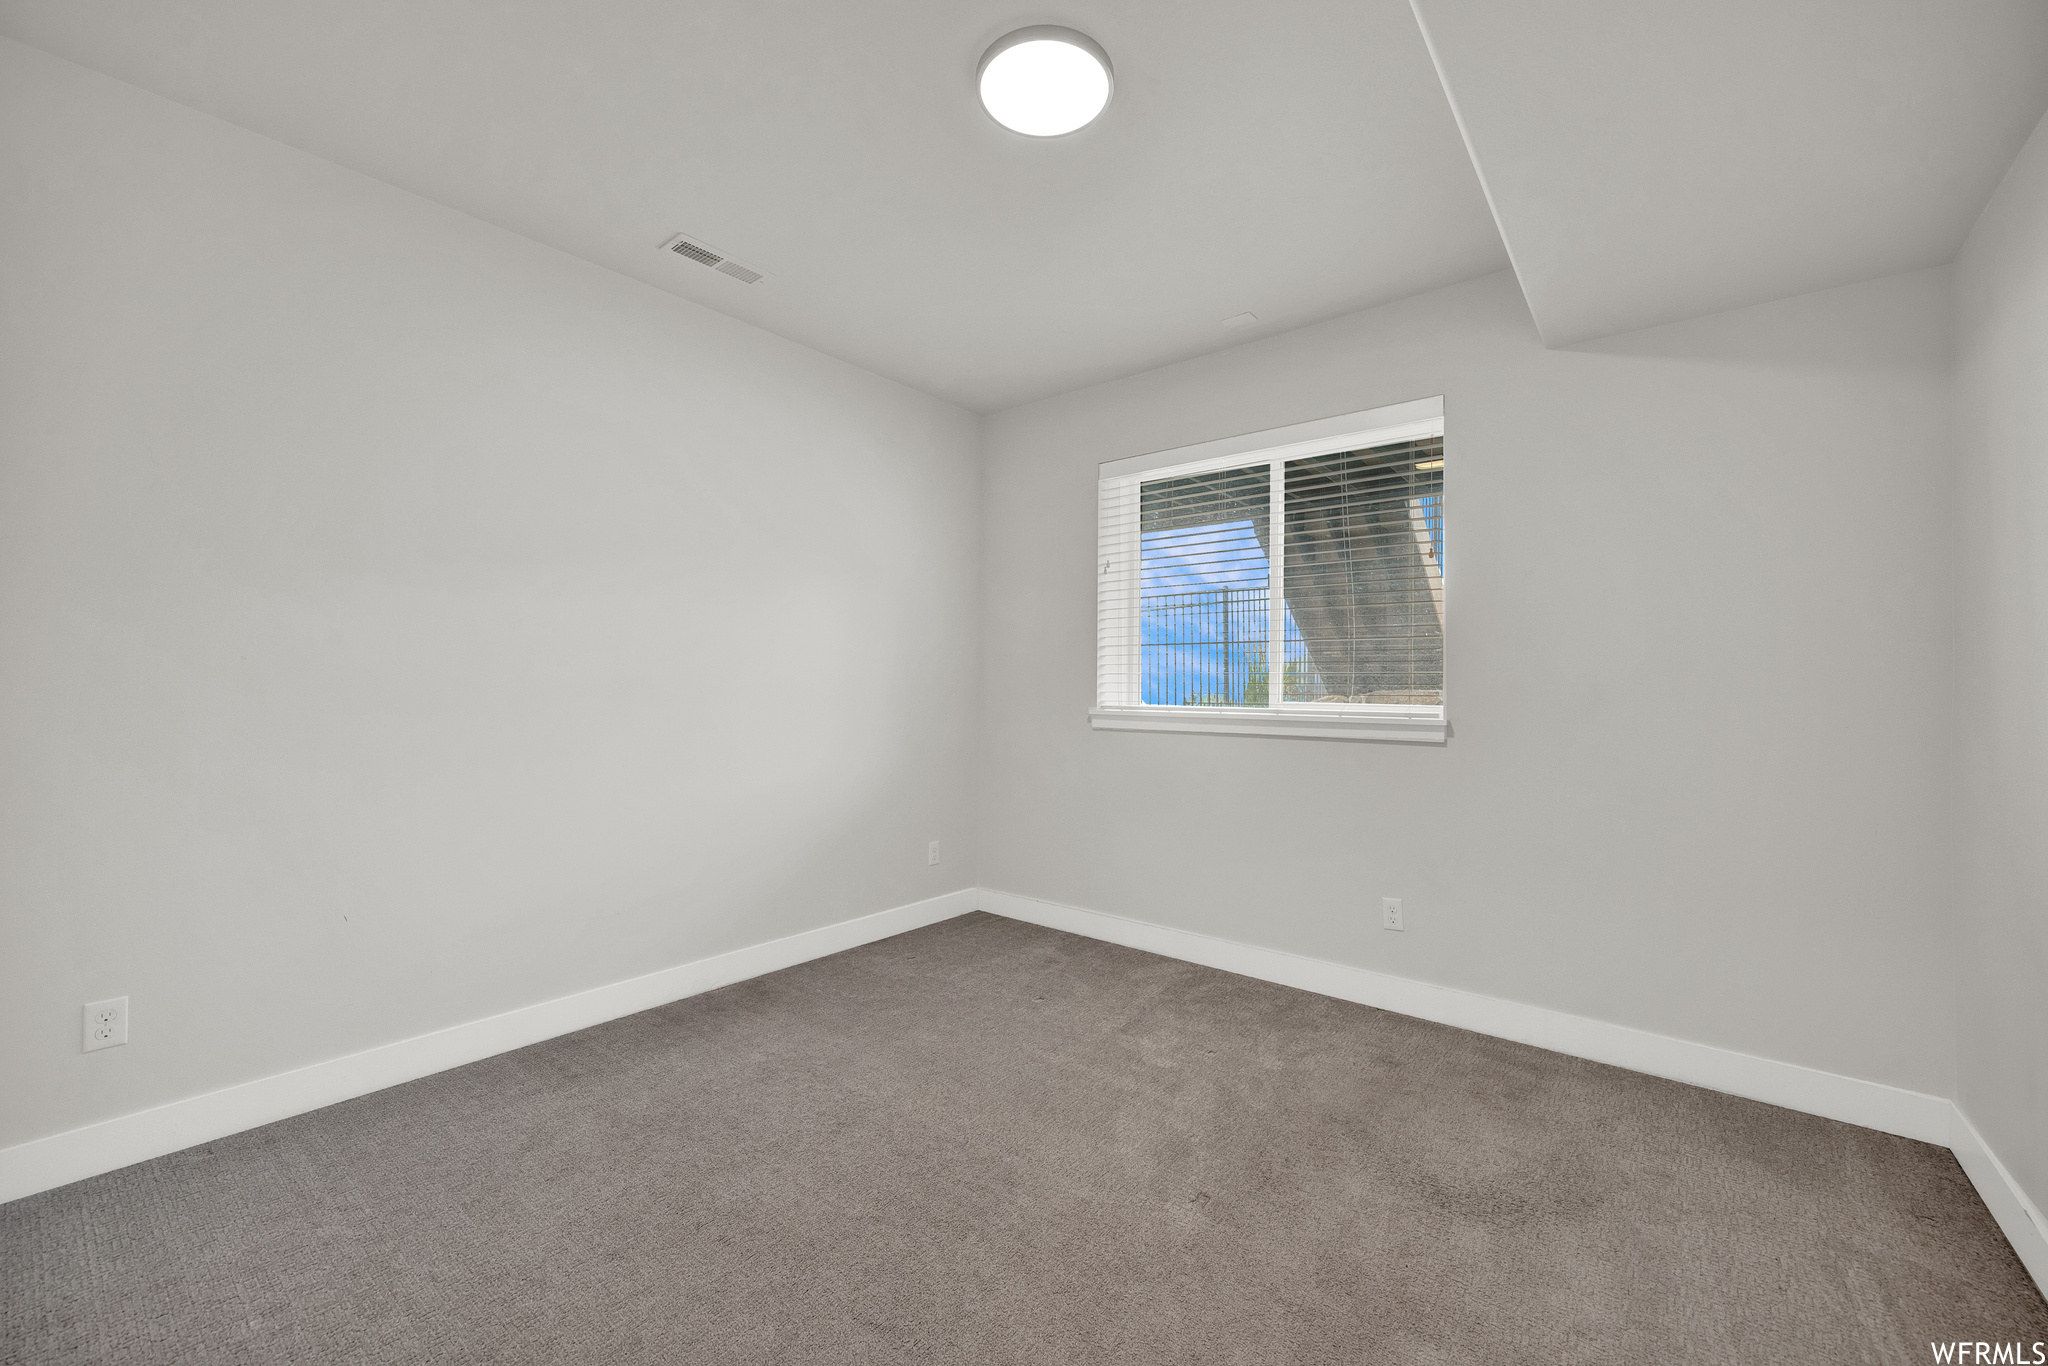 Carpeted empty room with natural light